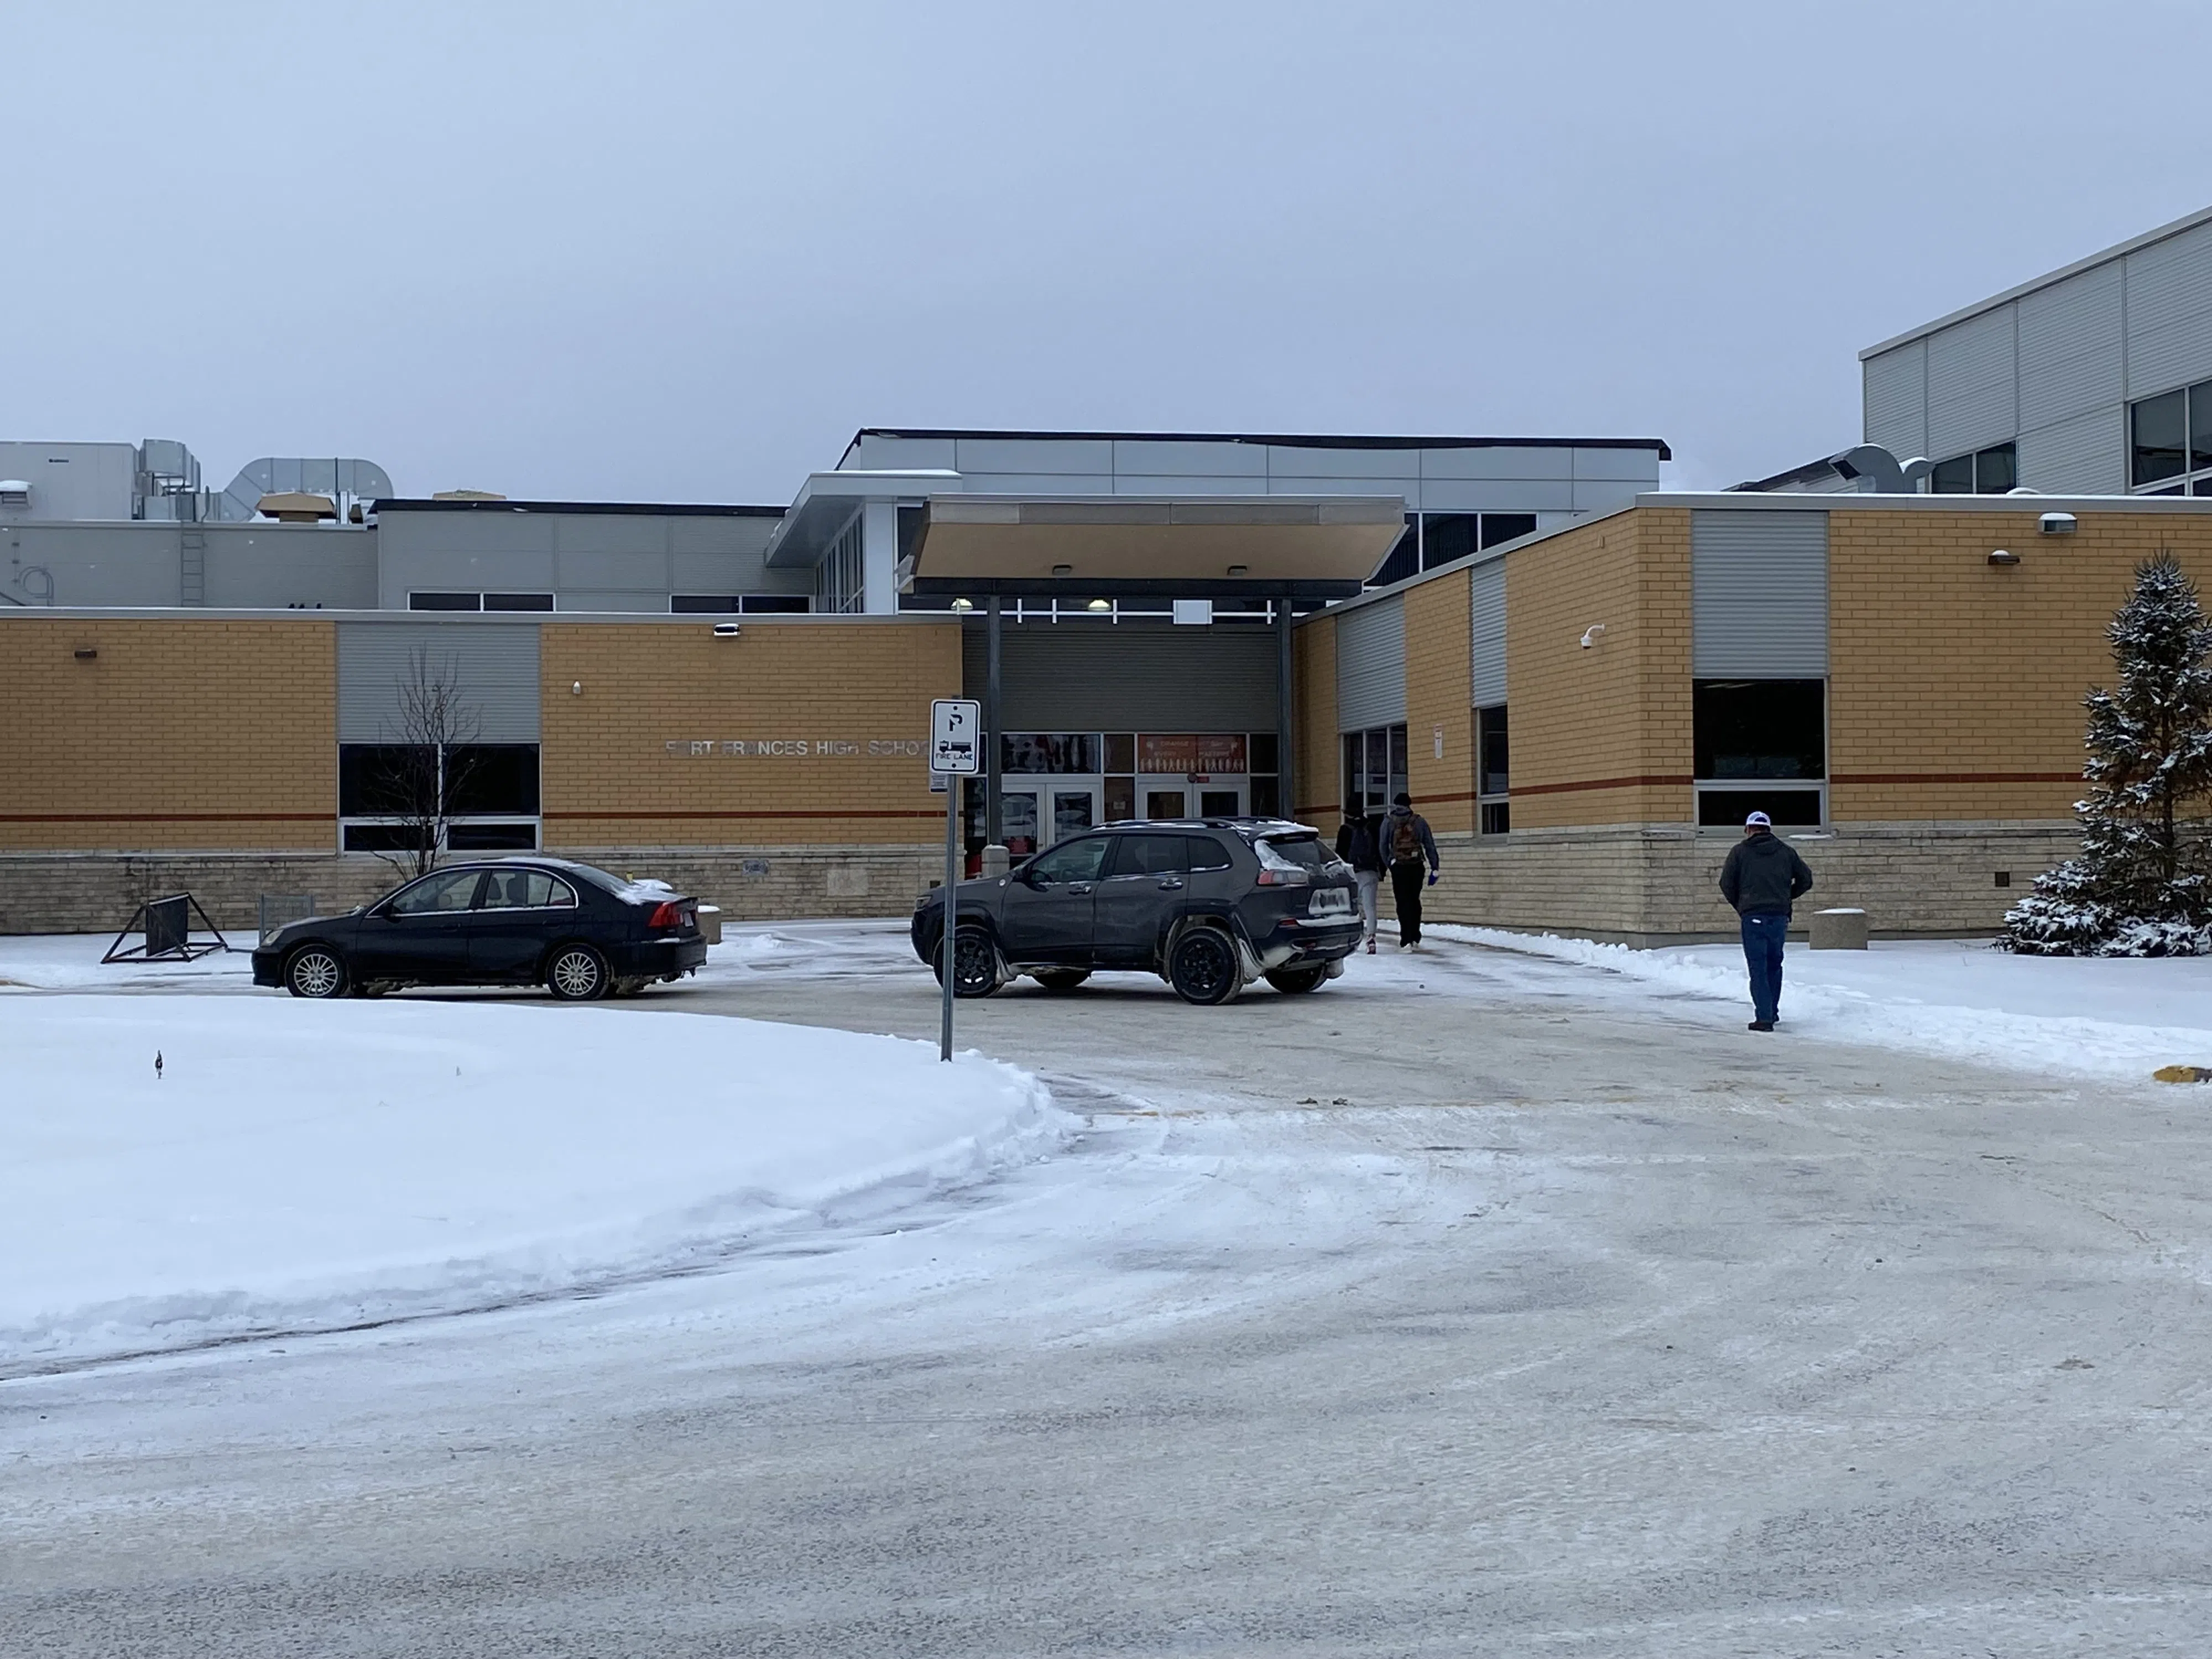 Fort High shut down due to further threats